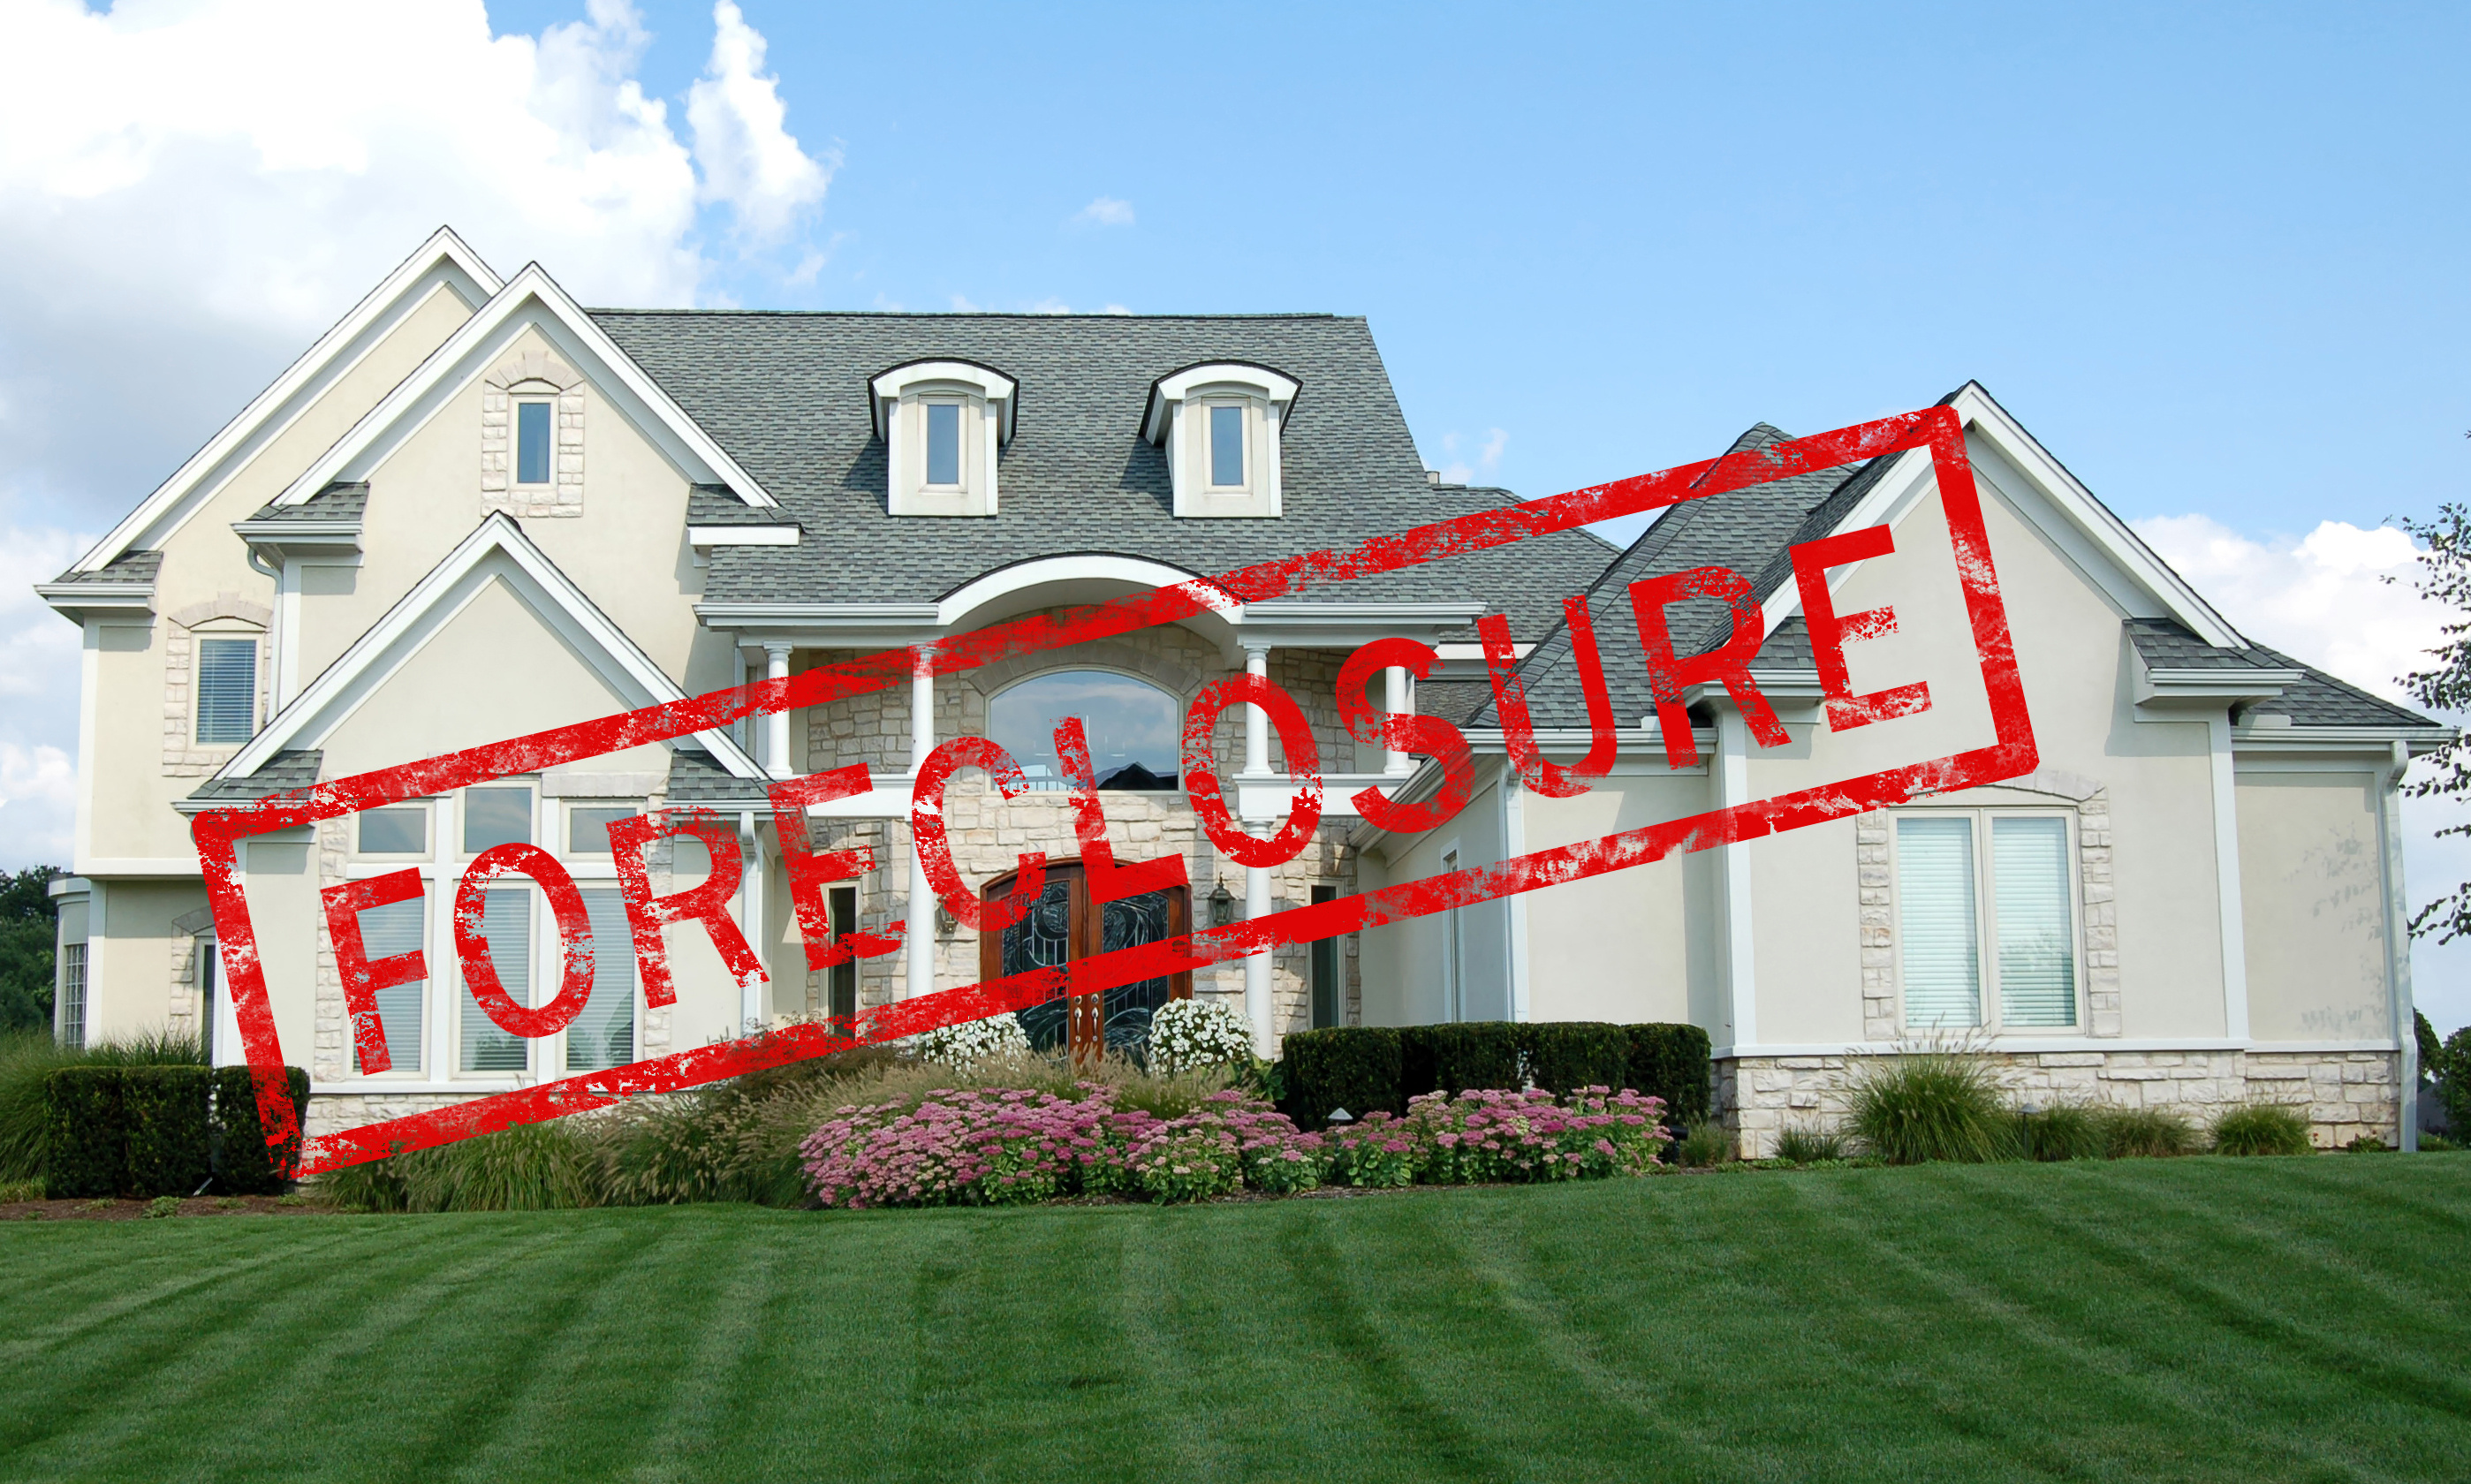 Call TAMMY WOODMAN to order valuations of Benton foreclosures